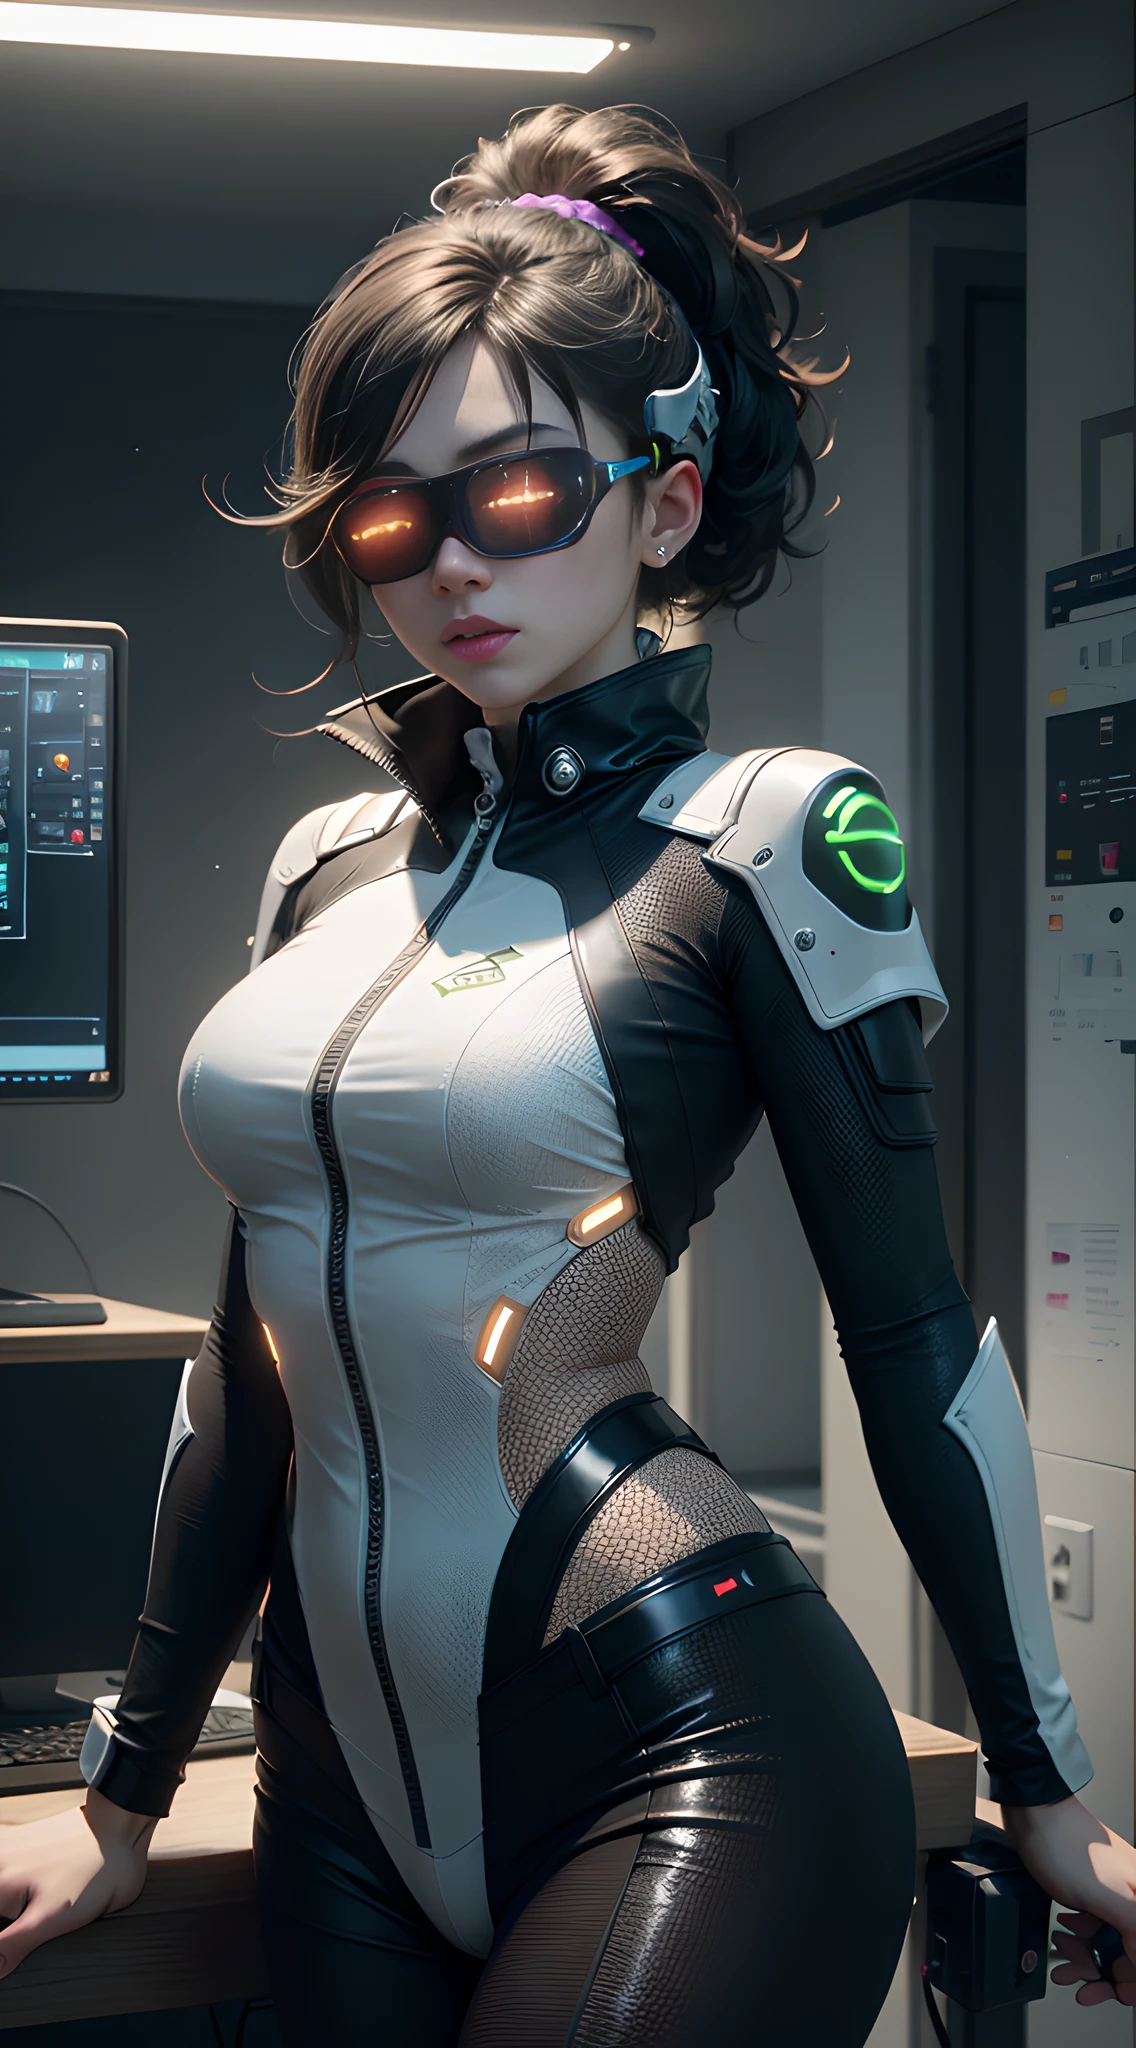 （（bestquality））， （（master masterpiece））， （Very Detail：1.3）， 。.3d， Beautiful （Cyberpunk：1.3） Female hacker，Mohican hairstyle，Looking at the Audience，Thick hair，Operate a computer terminal，Head-mounted display，Computer server，LCD screen，Fiber optic cable，Company logo，hdr（High dynamic range），Ray Tracking，NVIDIA RTX，Super-Resolution，Unreal 5，sub-surface Scattering，PBR textures，Post-processing，Anisotropic filtration，depth of field，Maximum clarity and sharpnesulti-layer textures，Albedo and highlight maps，Surface coloring，Accurately simulate light-material interactions，Perfect proportions，Octane rendering，Duotone illumination，Low ISO，White balance，trichotomy，Wide aperture，8K RAW，Efficient sub-pixel，Subpixel convolution，Luminous particles，Dynamic pose